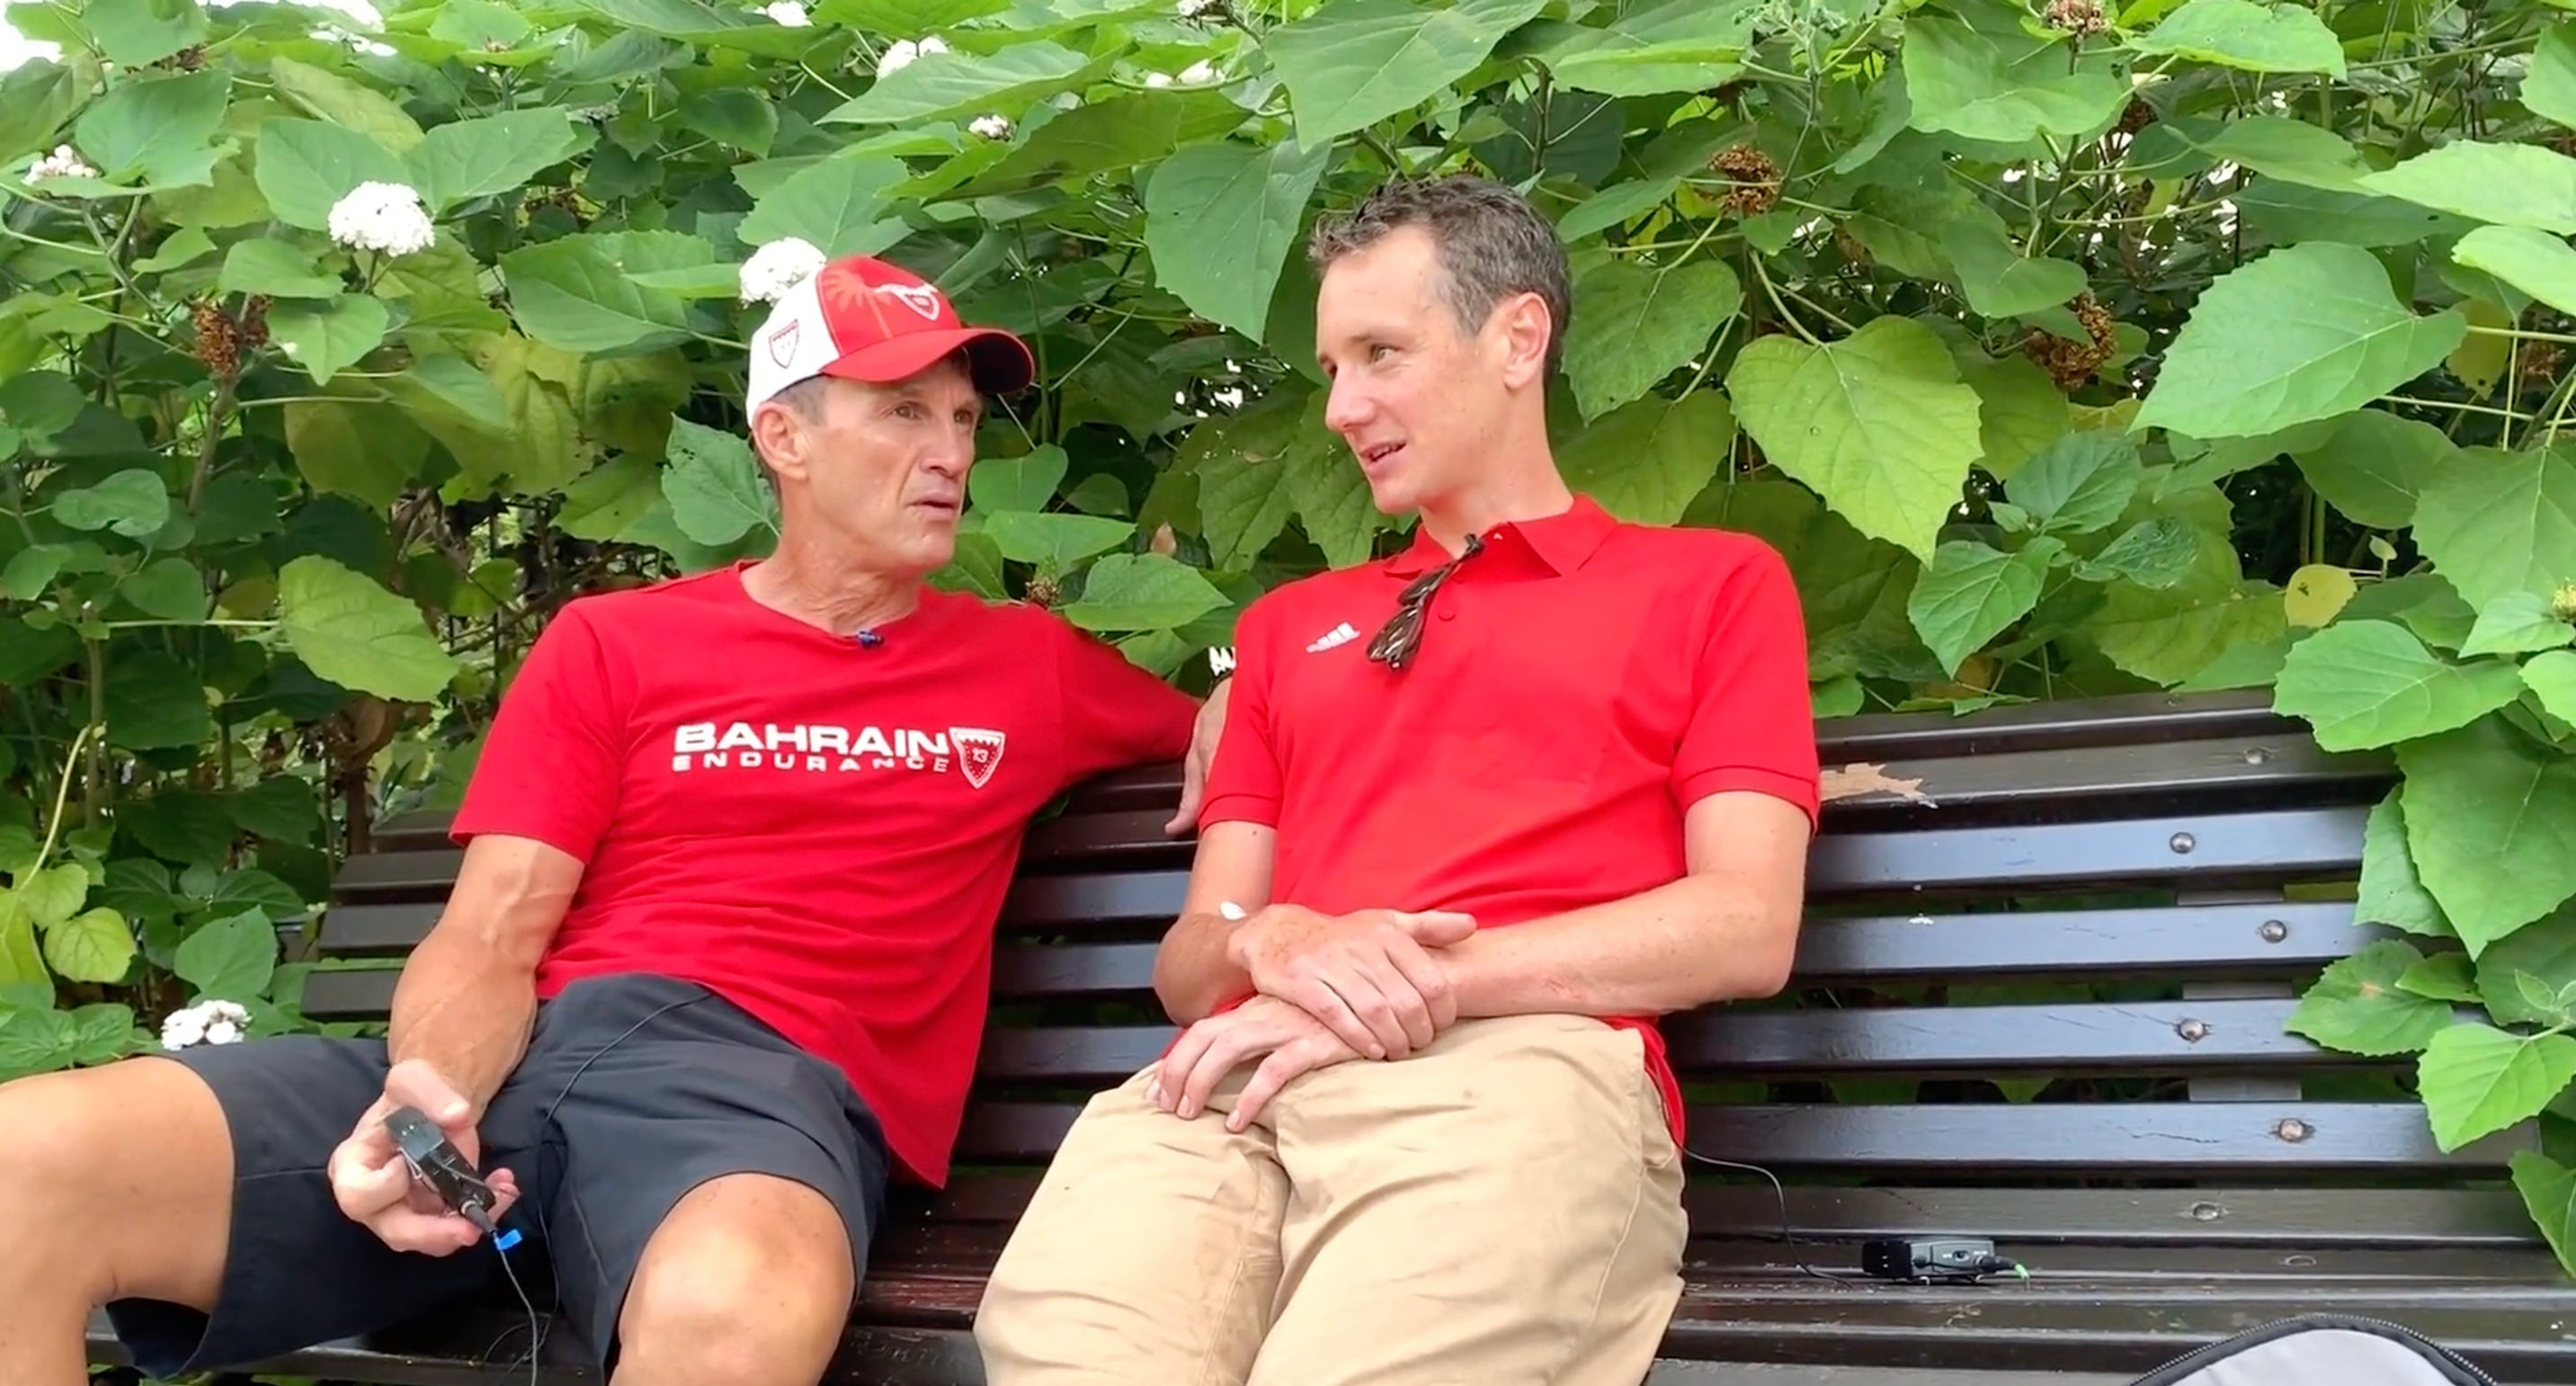 Ali Brownlee behind the scenes at the 70.3 World Champs